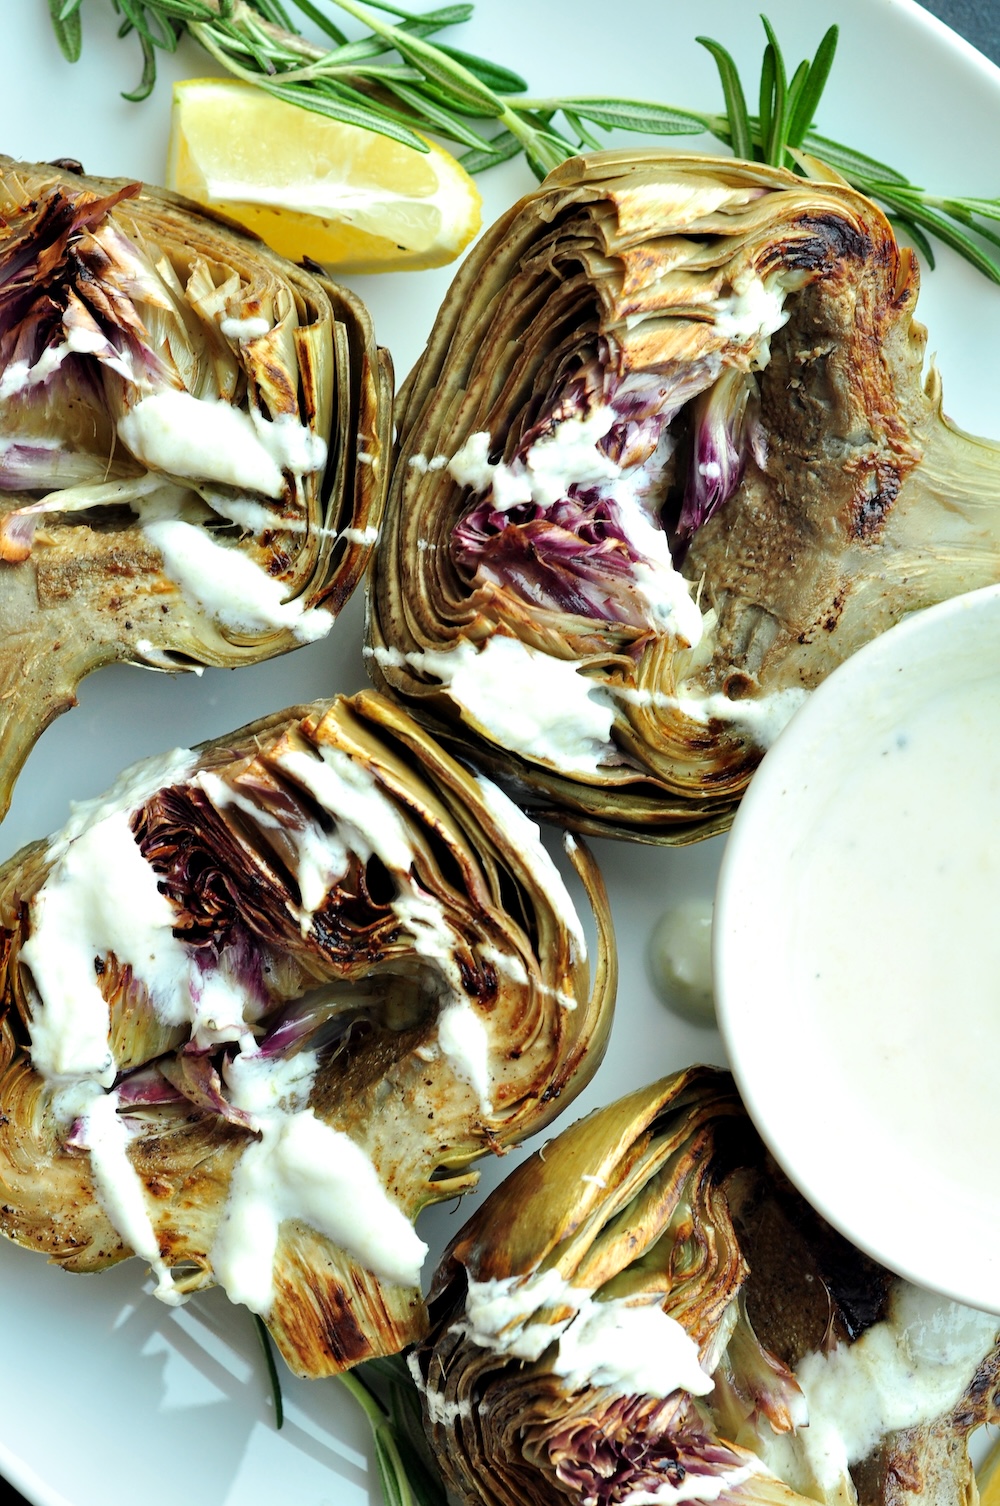 These beautifully tender sous vide artichokes are a versatile choice as either a sophisticated appetizer or a refined side dish for your main courses. Serve them with a homemade yogurt dipping sauce—its creaminess and hint of zest complement the subtle, earthy flavor of the artichokes exquisitely.